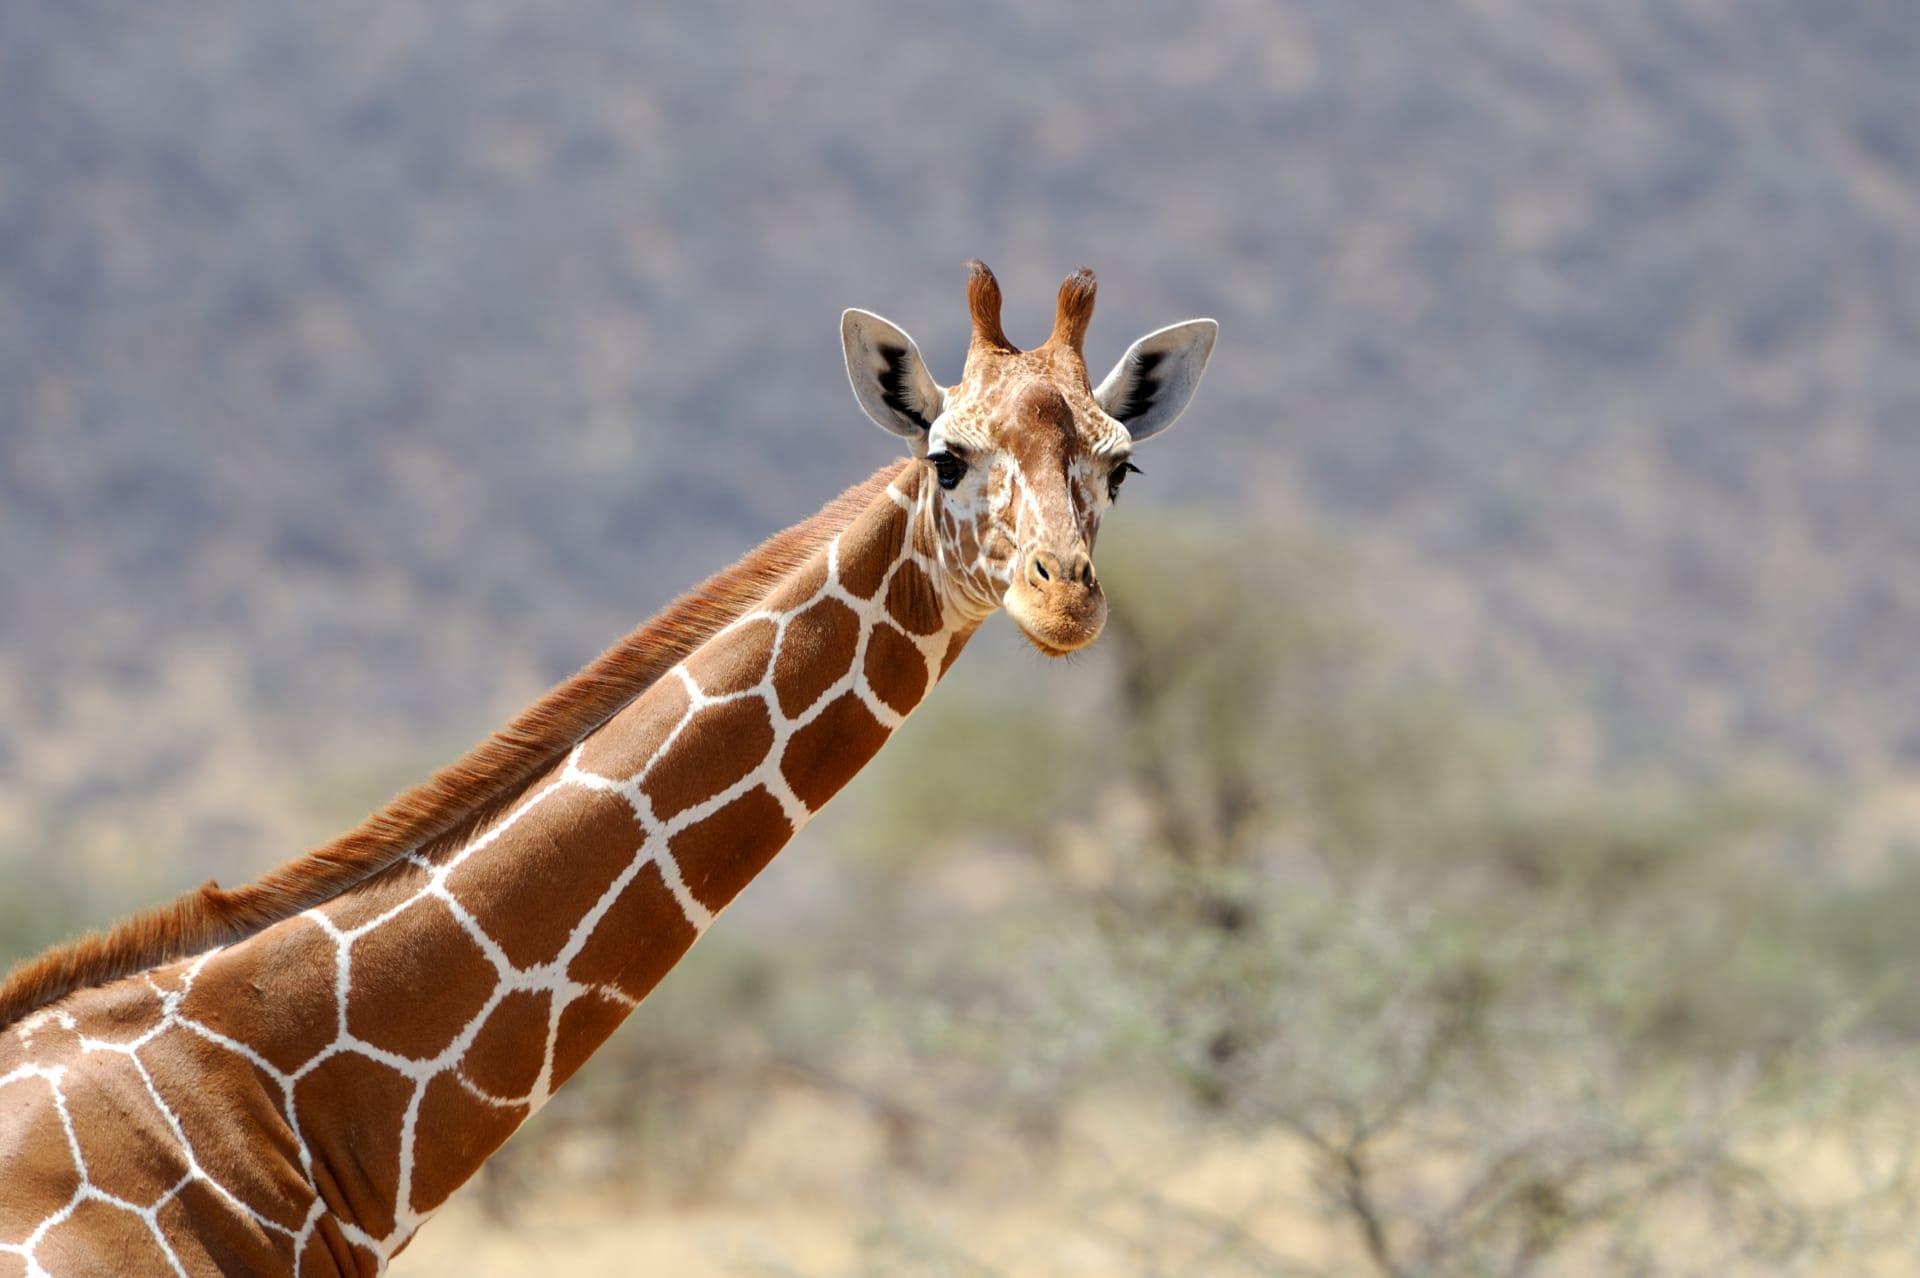 Giraffe pictures